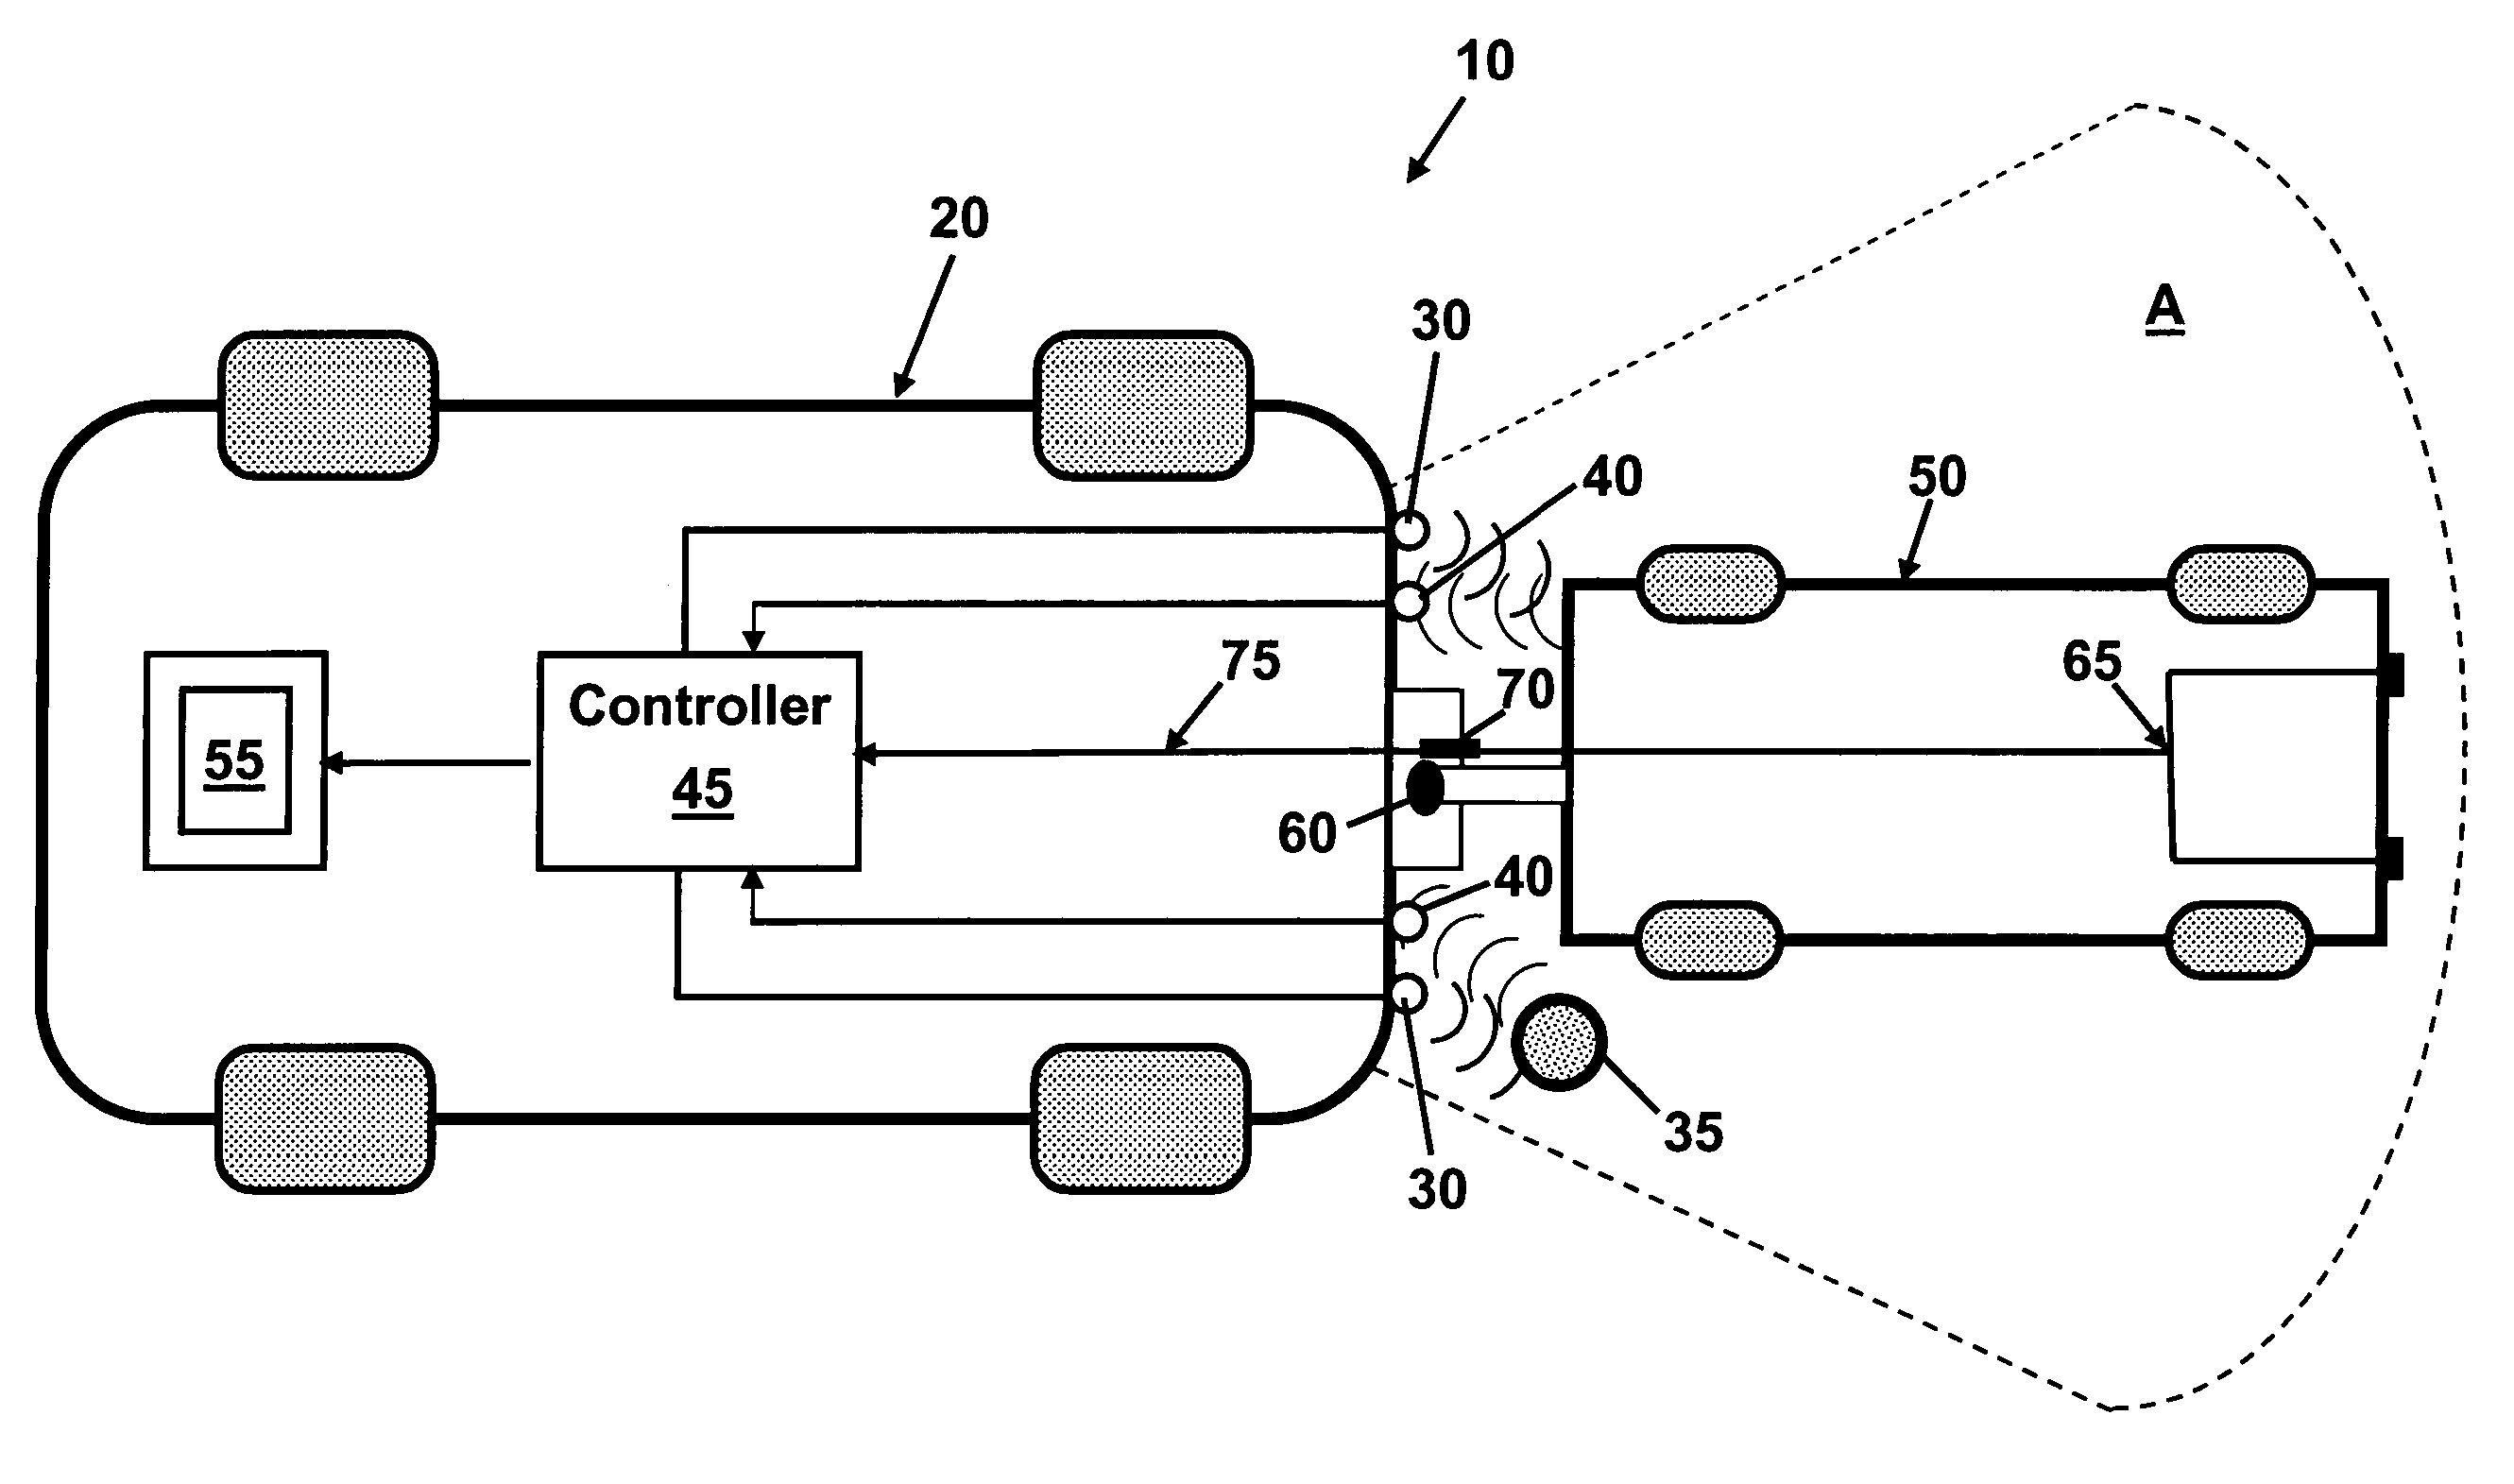 Trailer detection circuit for a vehicle park assist system